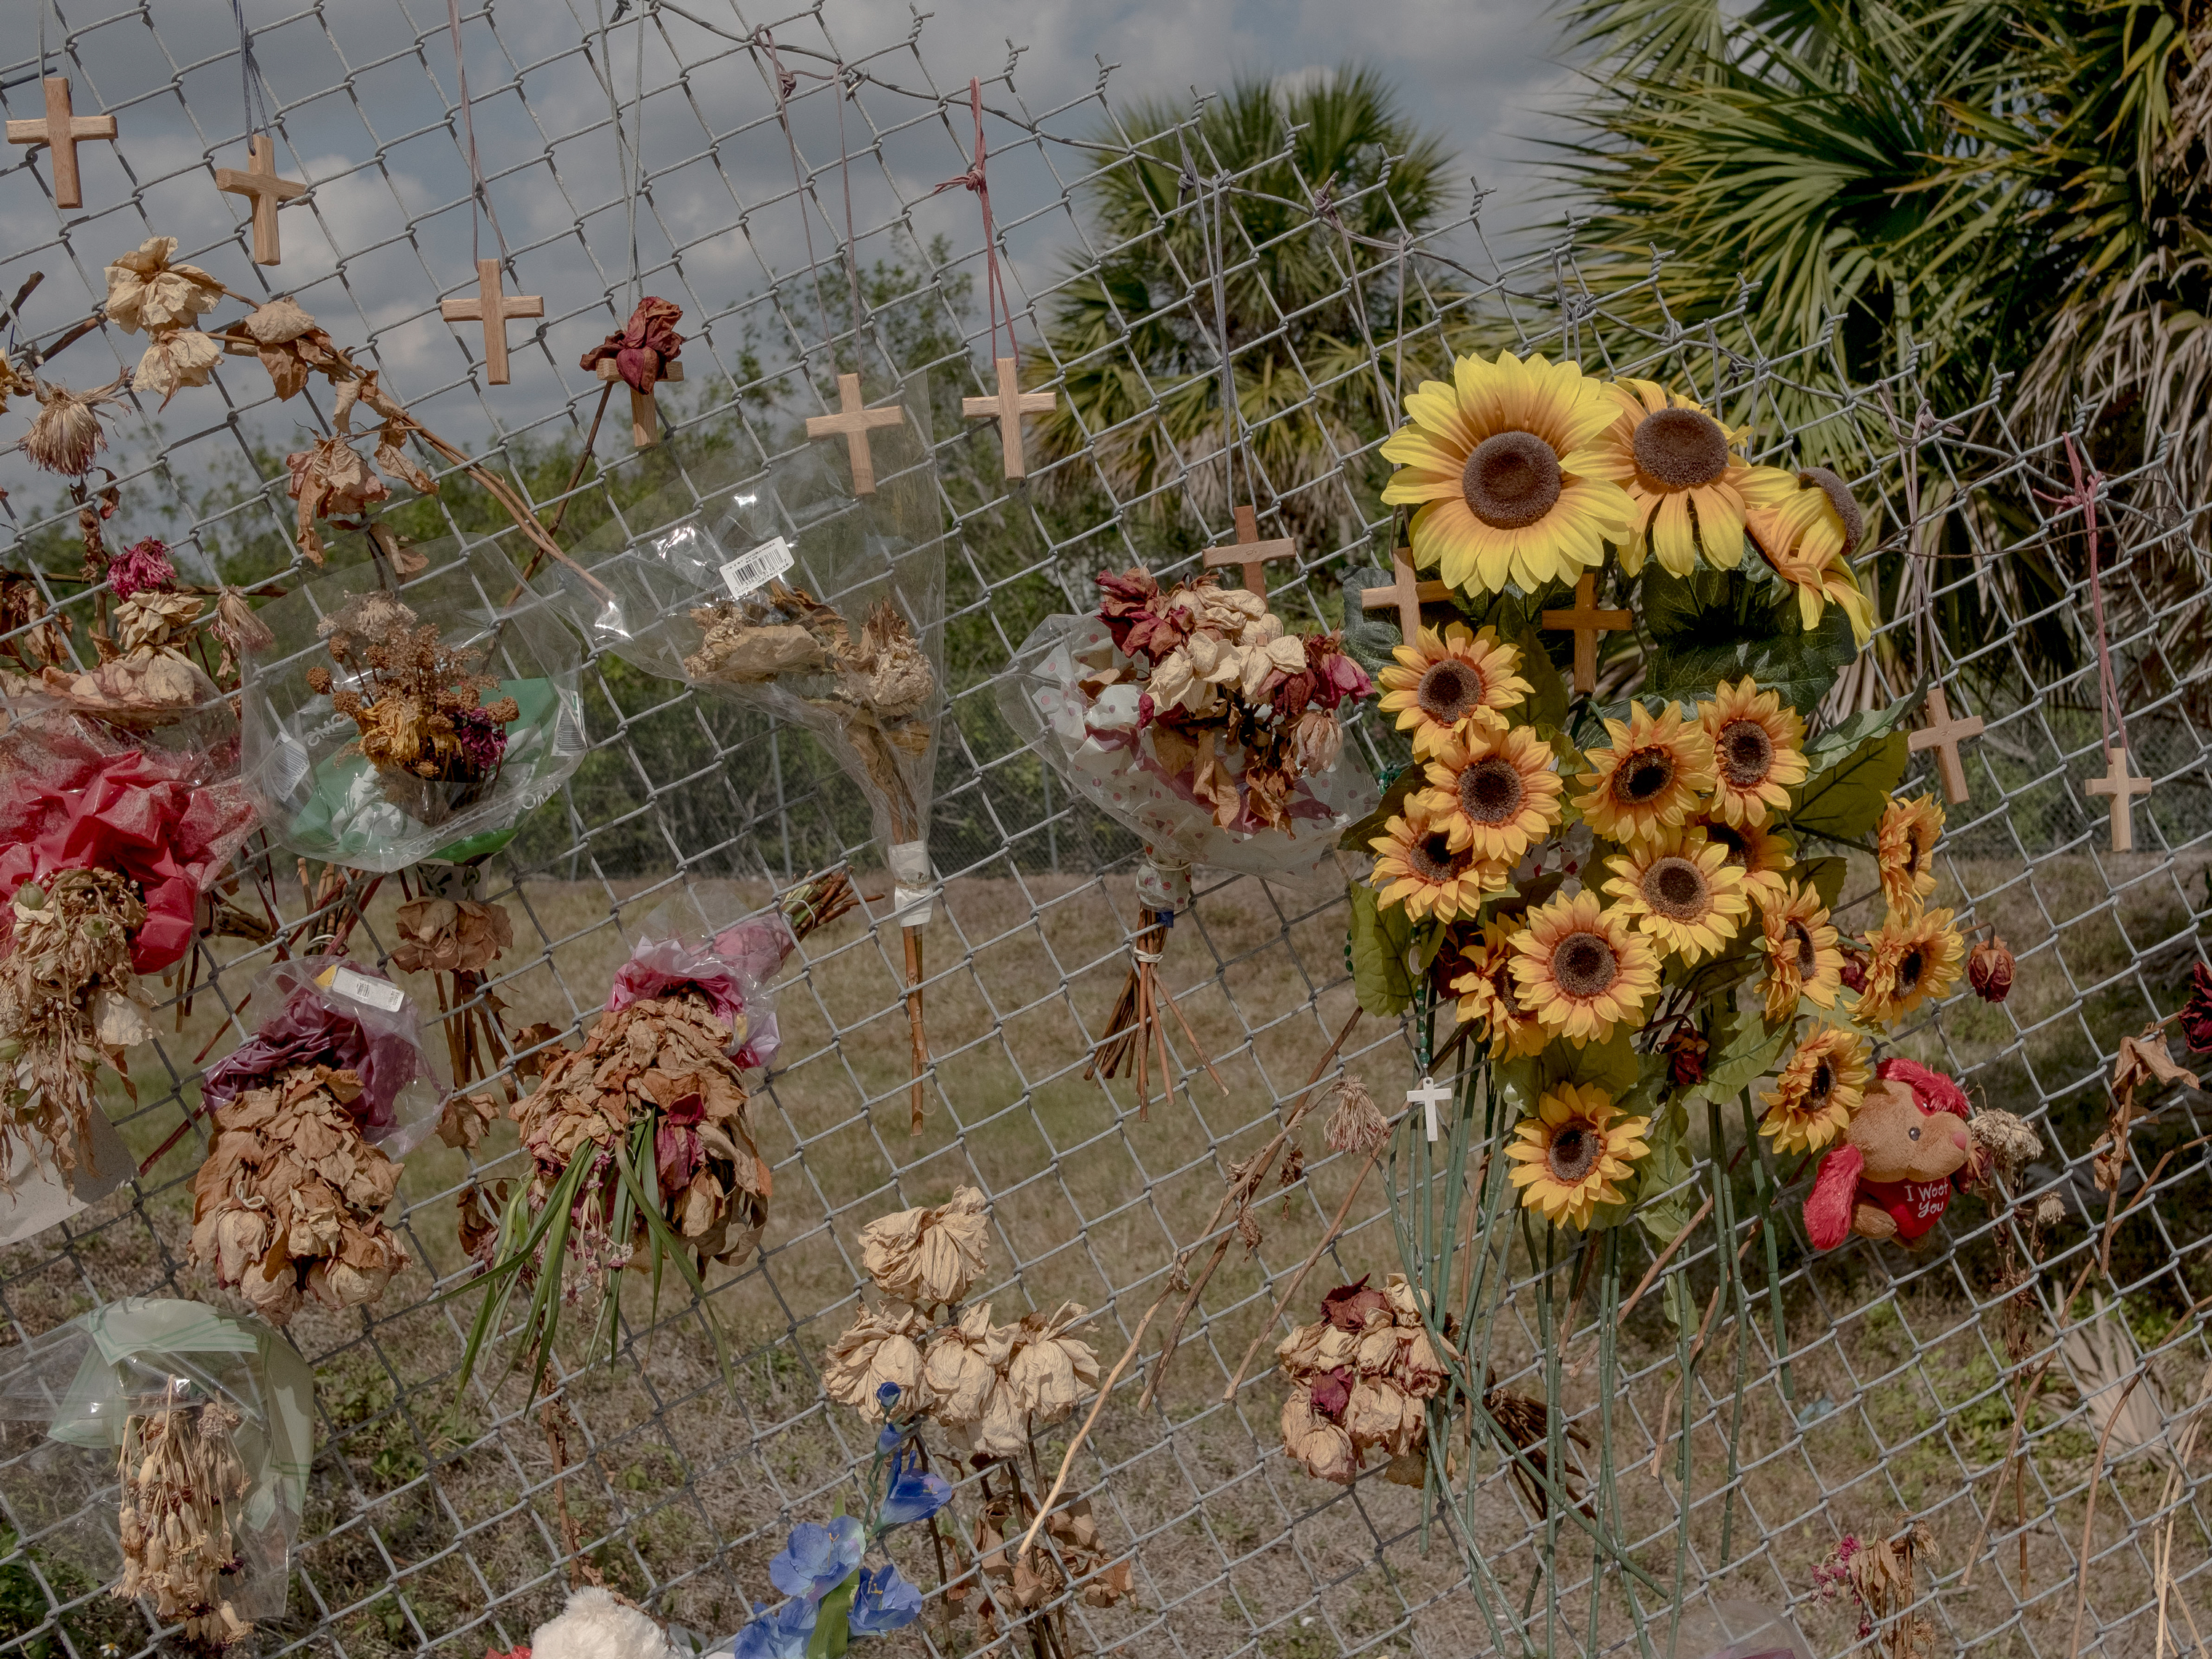 Three weeks later, the crosses still hung and fresh flowers had been added to the dead ones. (Gabriella Demczuk for TIME)